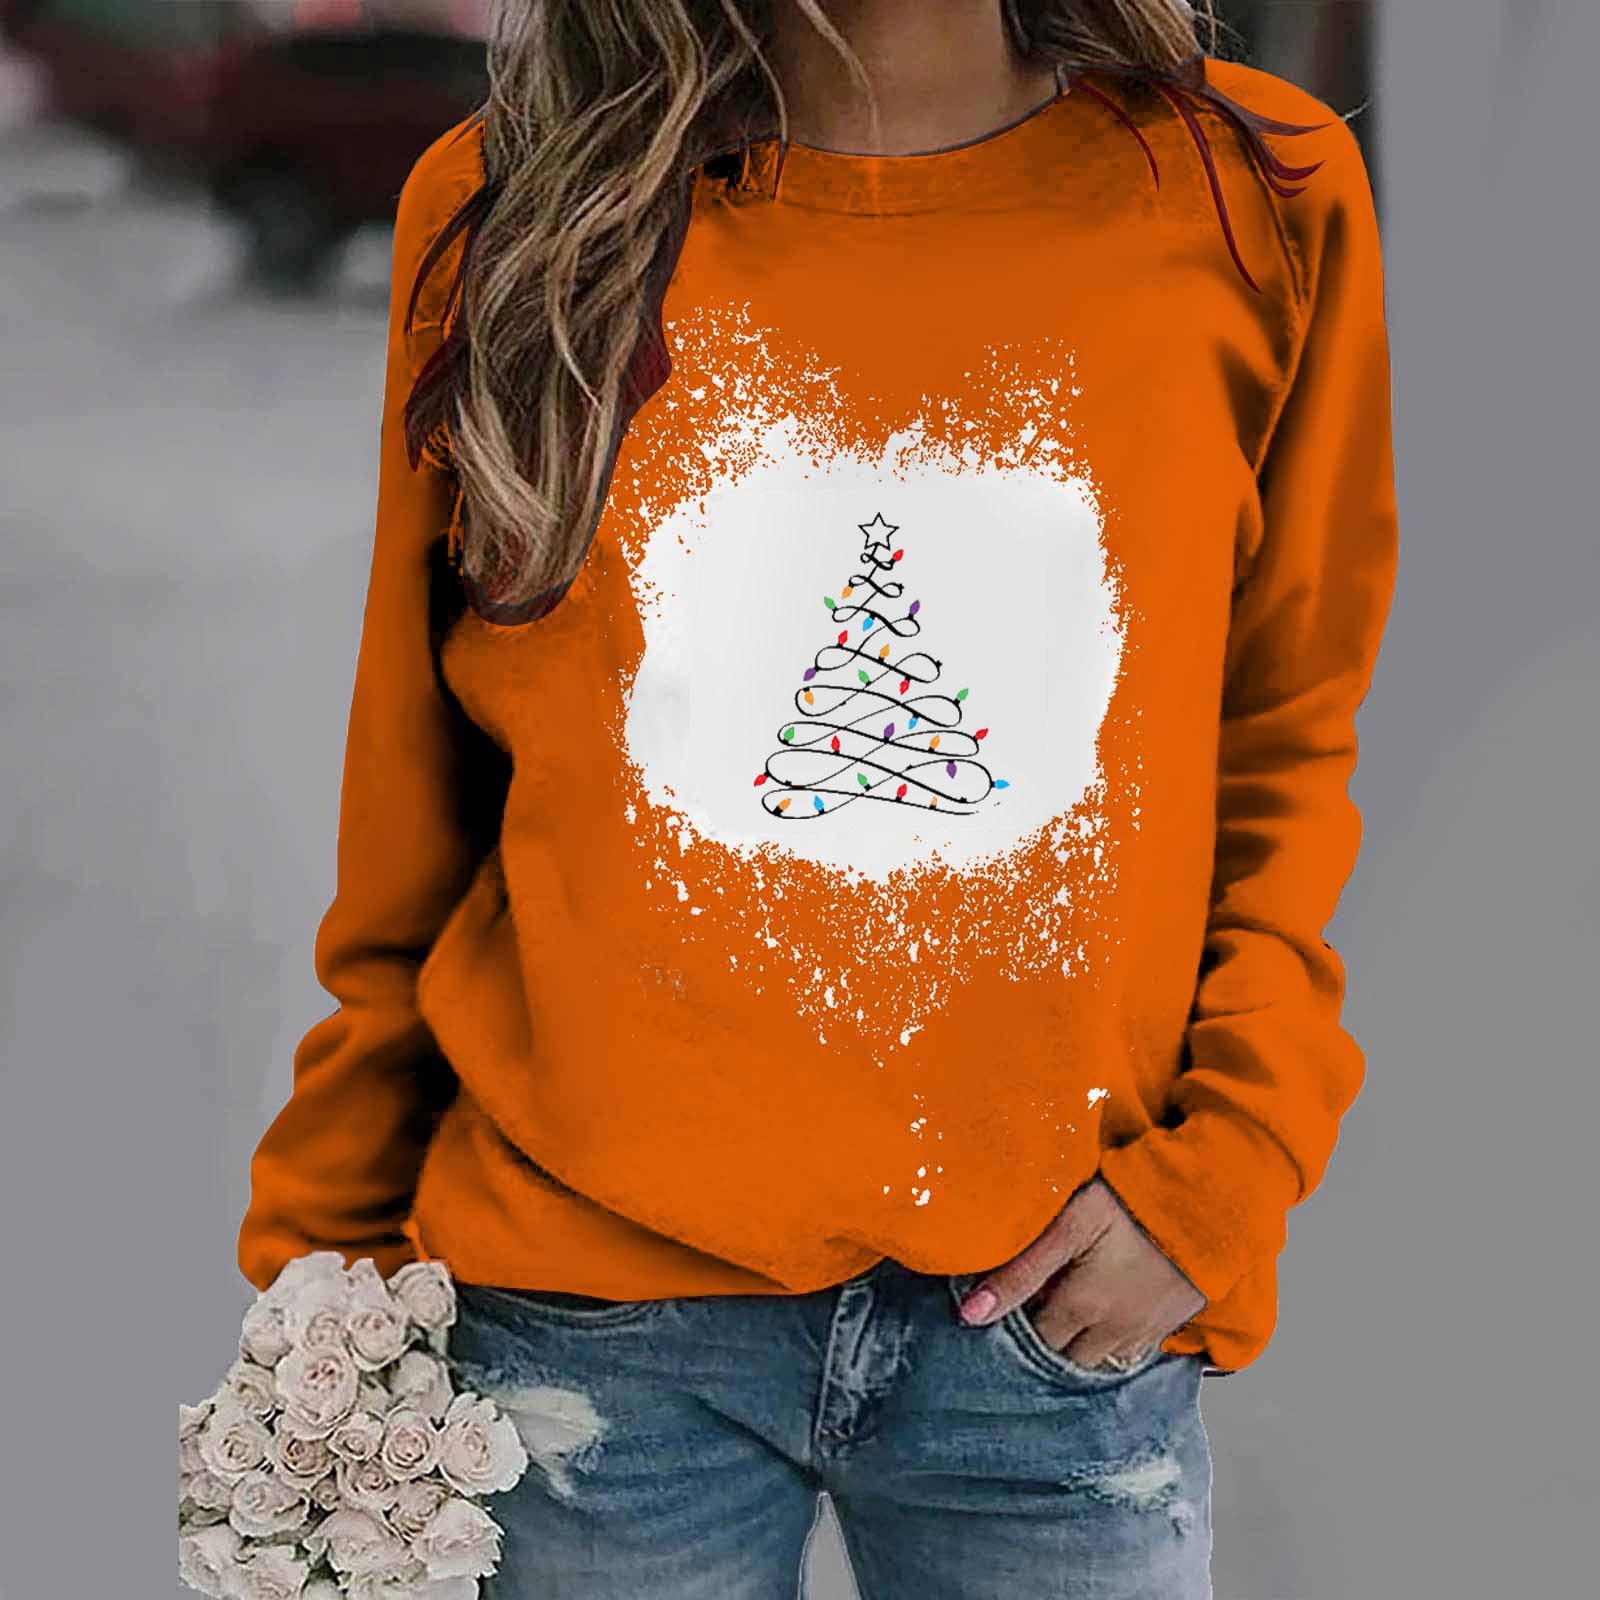 80s Outfit Merry Christmas Sweatshirt for Womens Oversized Print